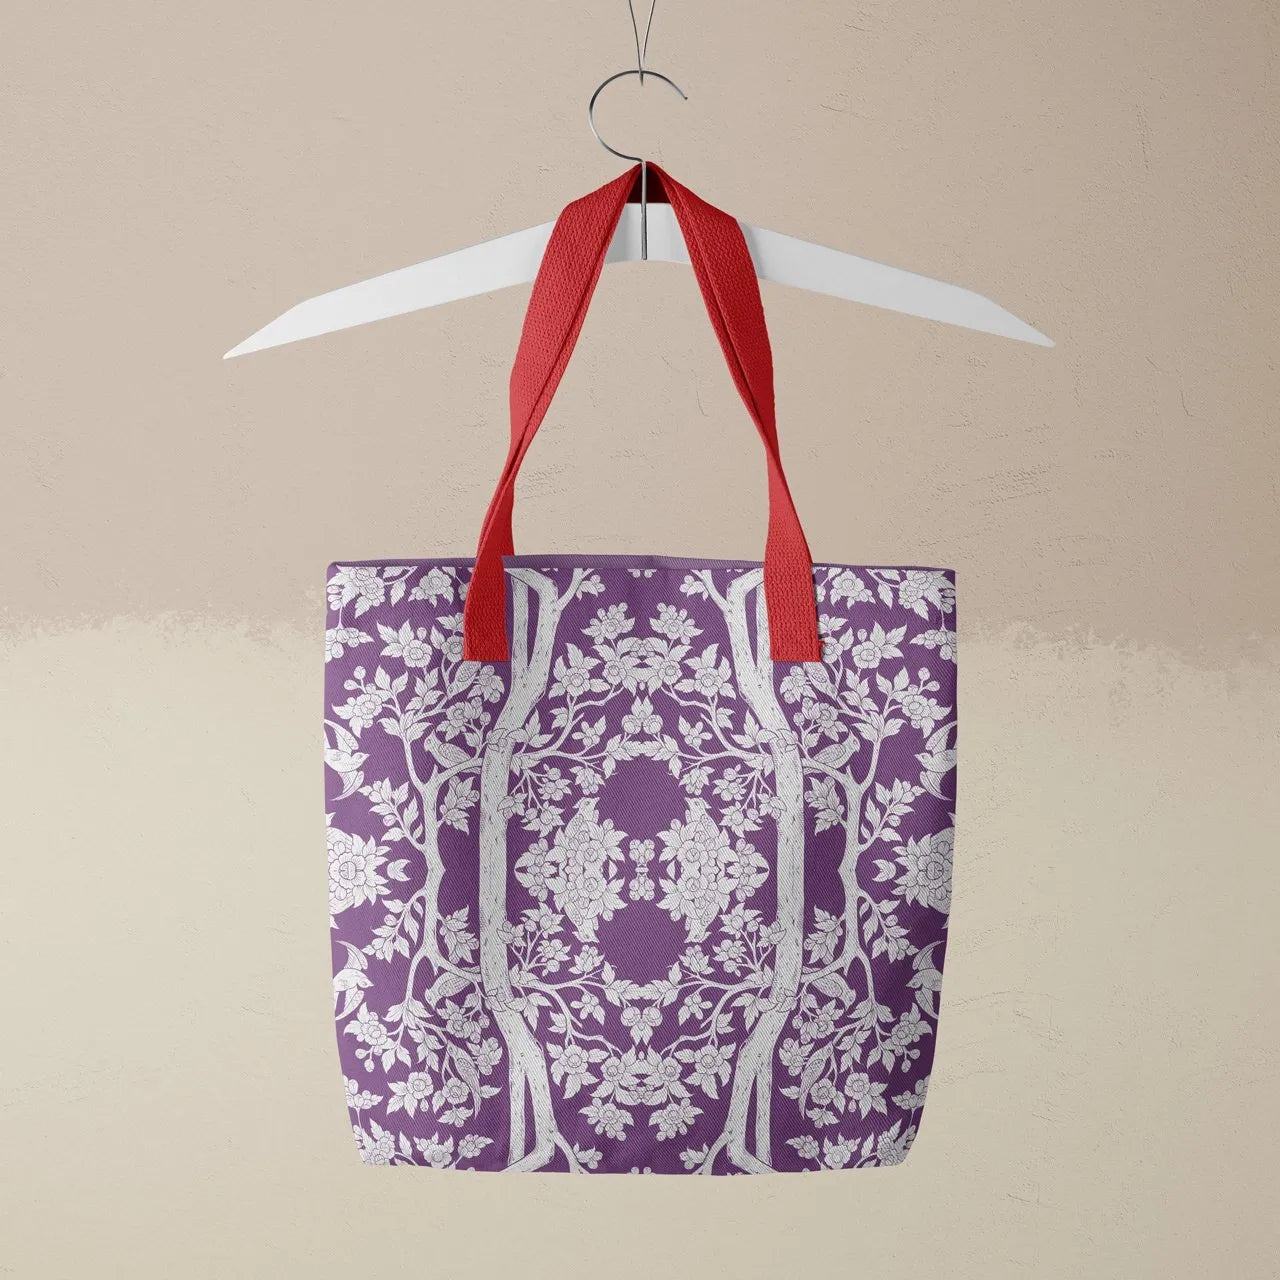 Aviary Tote - Purple Finch - Heavy Duty Reusable Grocery Bag - Red Handles - Shopping Totes - Aesthetic Art